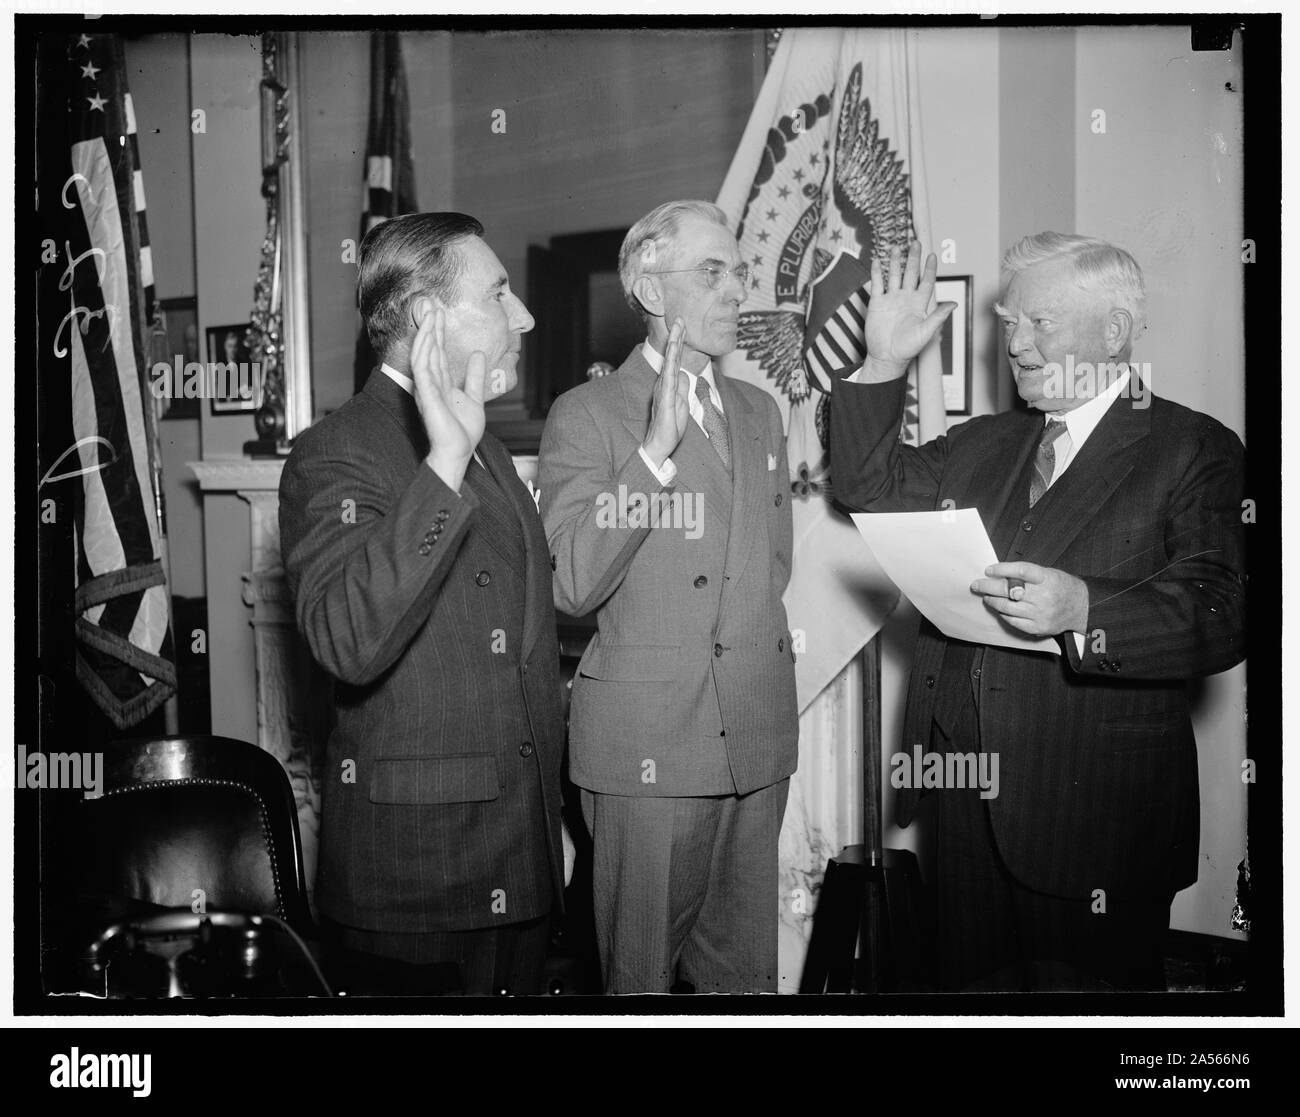 Vice President Garner administers oath to new Florida Senators. Washington, D.C., Dec. 8. Florida's new senators, Claude Pepper and Charles O. Andrews, presented their credentials and were administered the oath of office today by Vice President John N. Garner. Left to right: Senator Pepper, Senator Andrews, and Vice President Garner Stock Photo